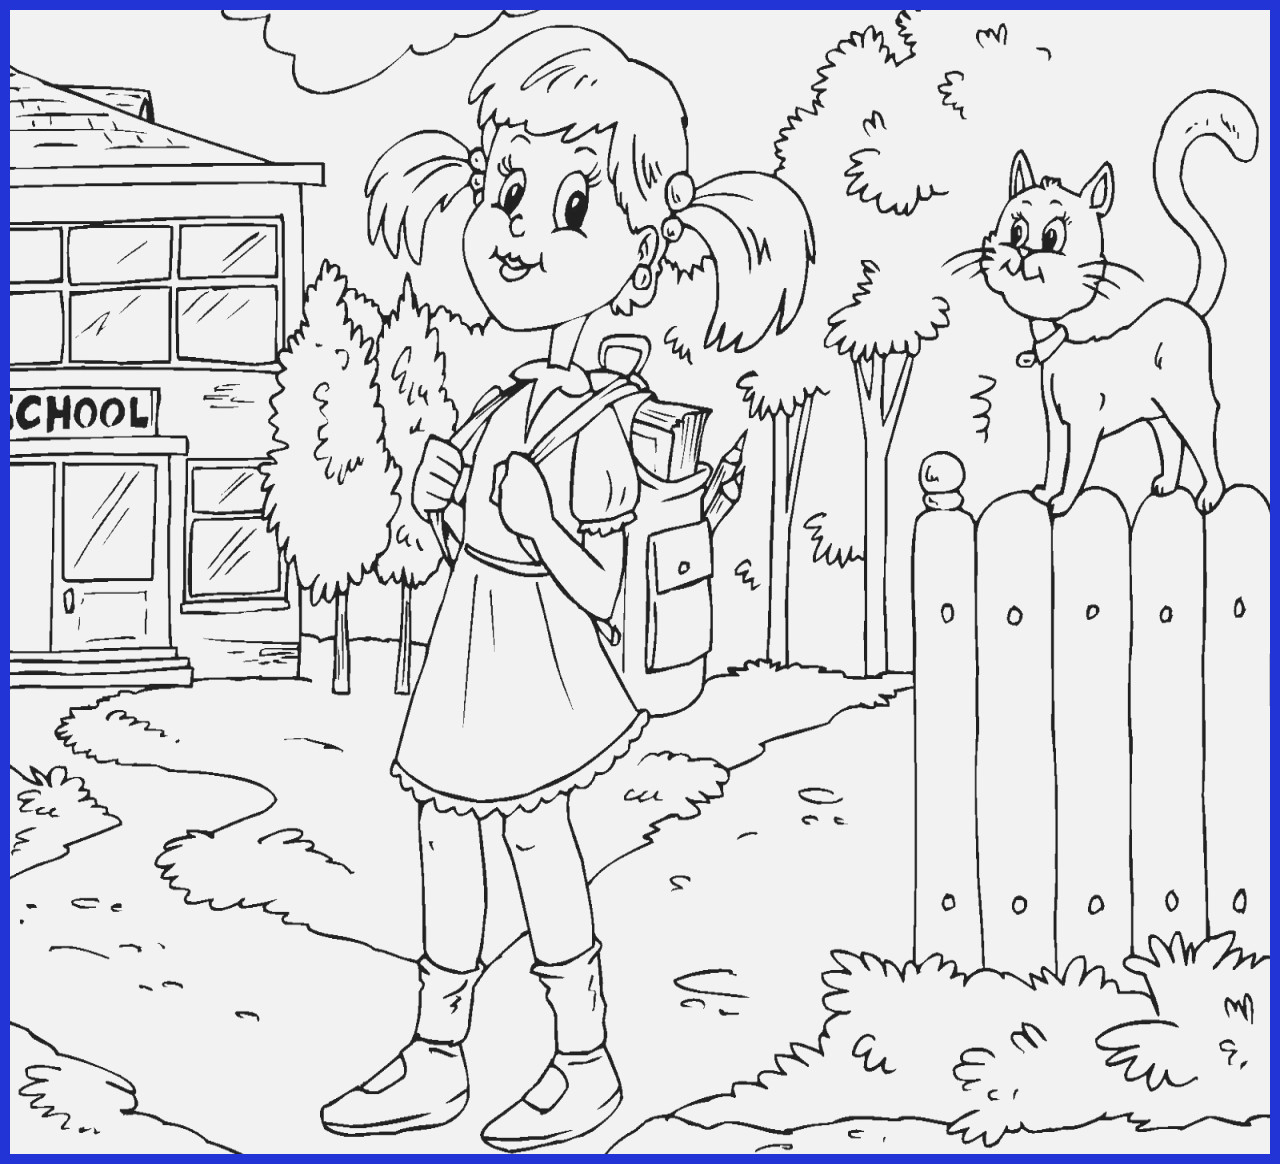 Coloring Pages For Elementary Students Back To School Coloring Sheet 28 Collection Of Elementary School